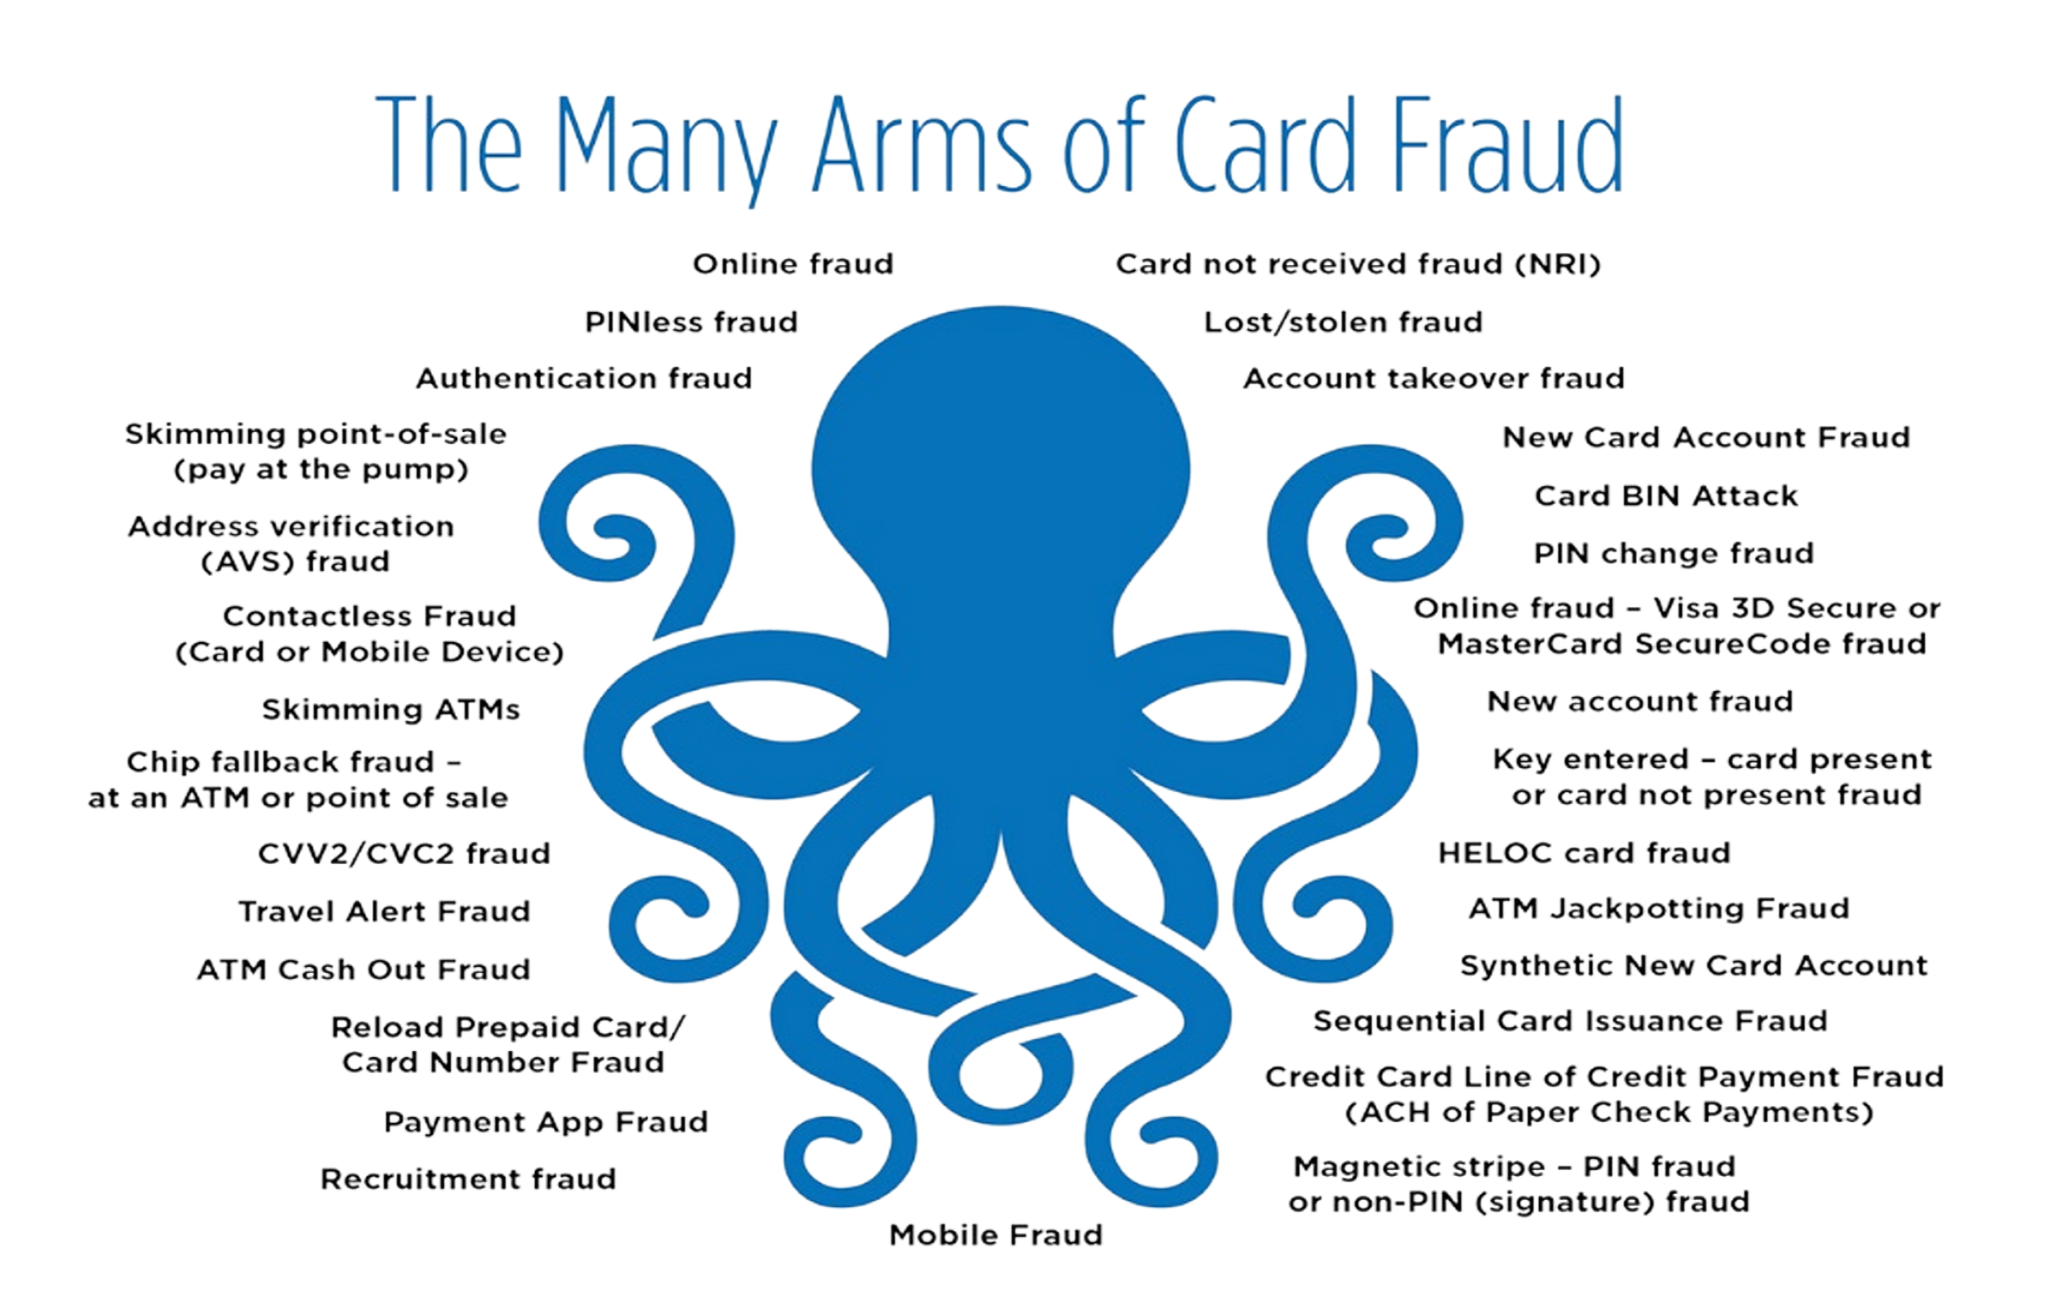 The many arms of fraud, including online fraud, PINless fraud, false authentication, skimming devices, reloading prepaid cards, account takeovers, payment app fraud, and more.